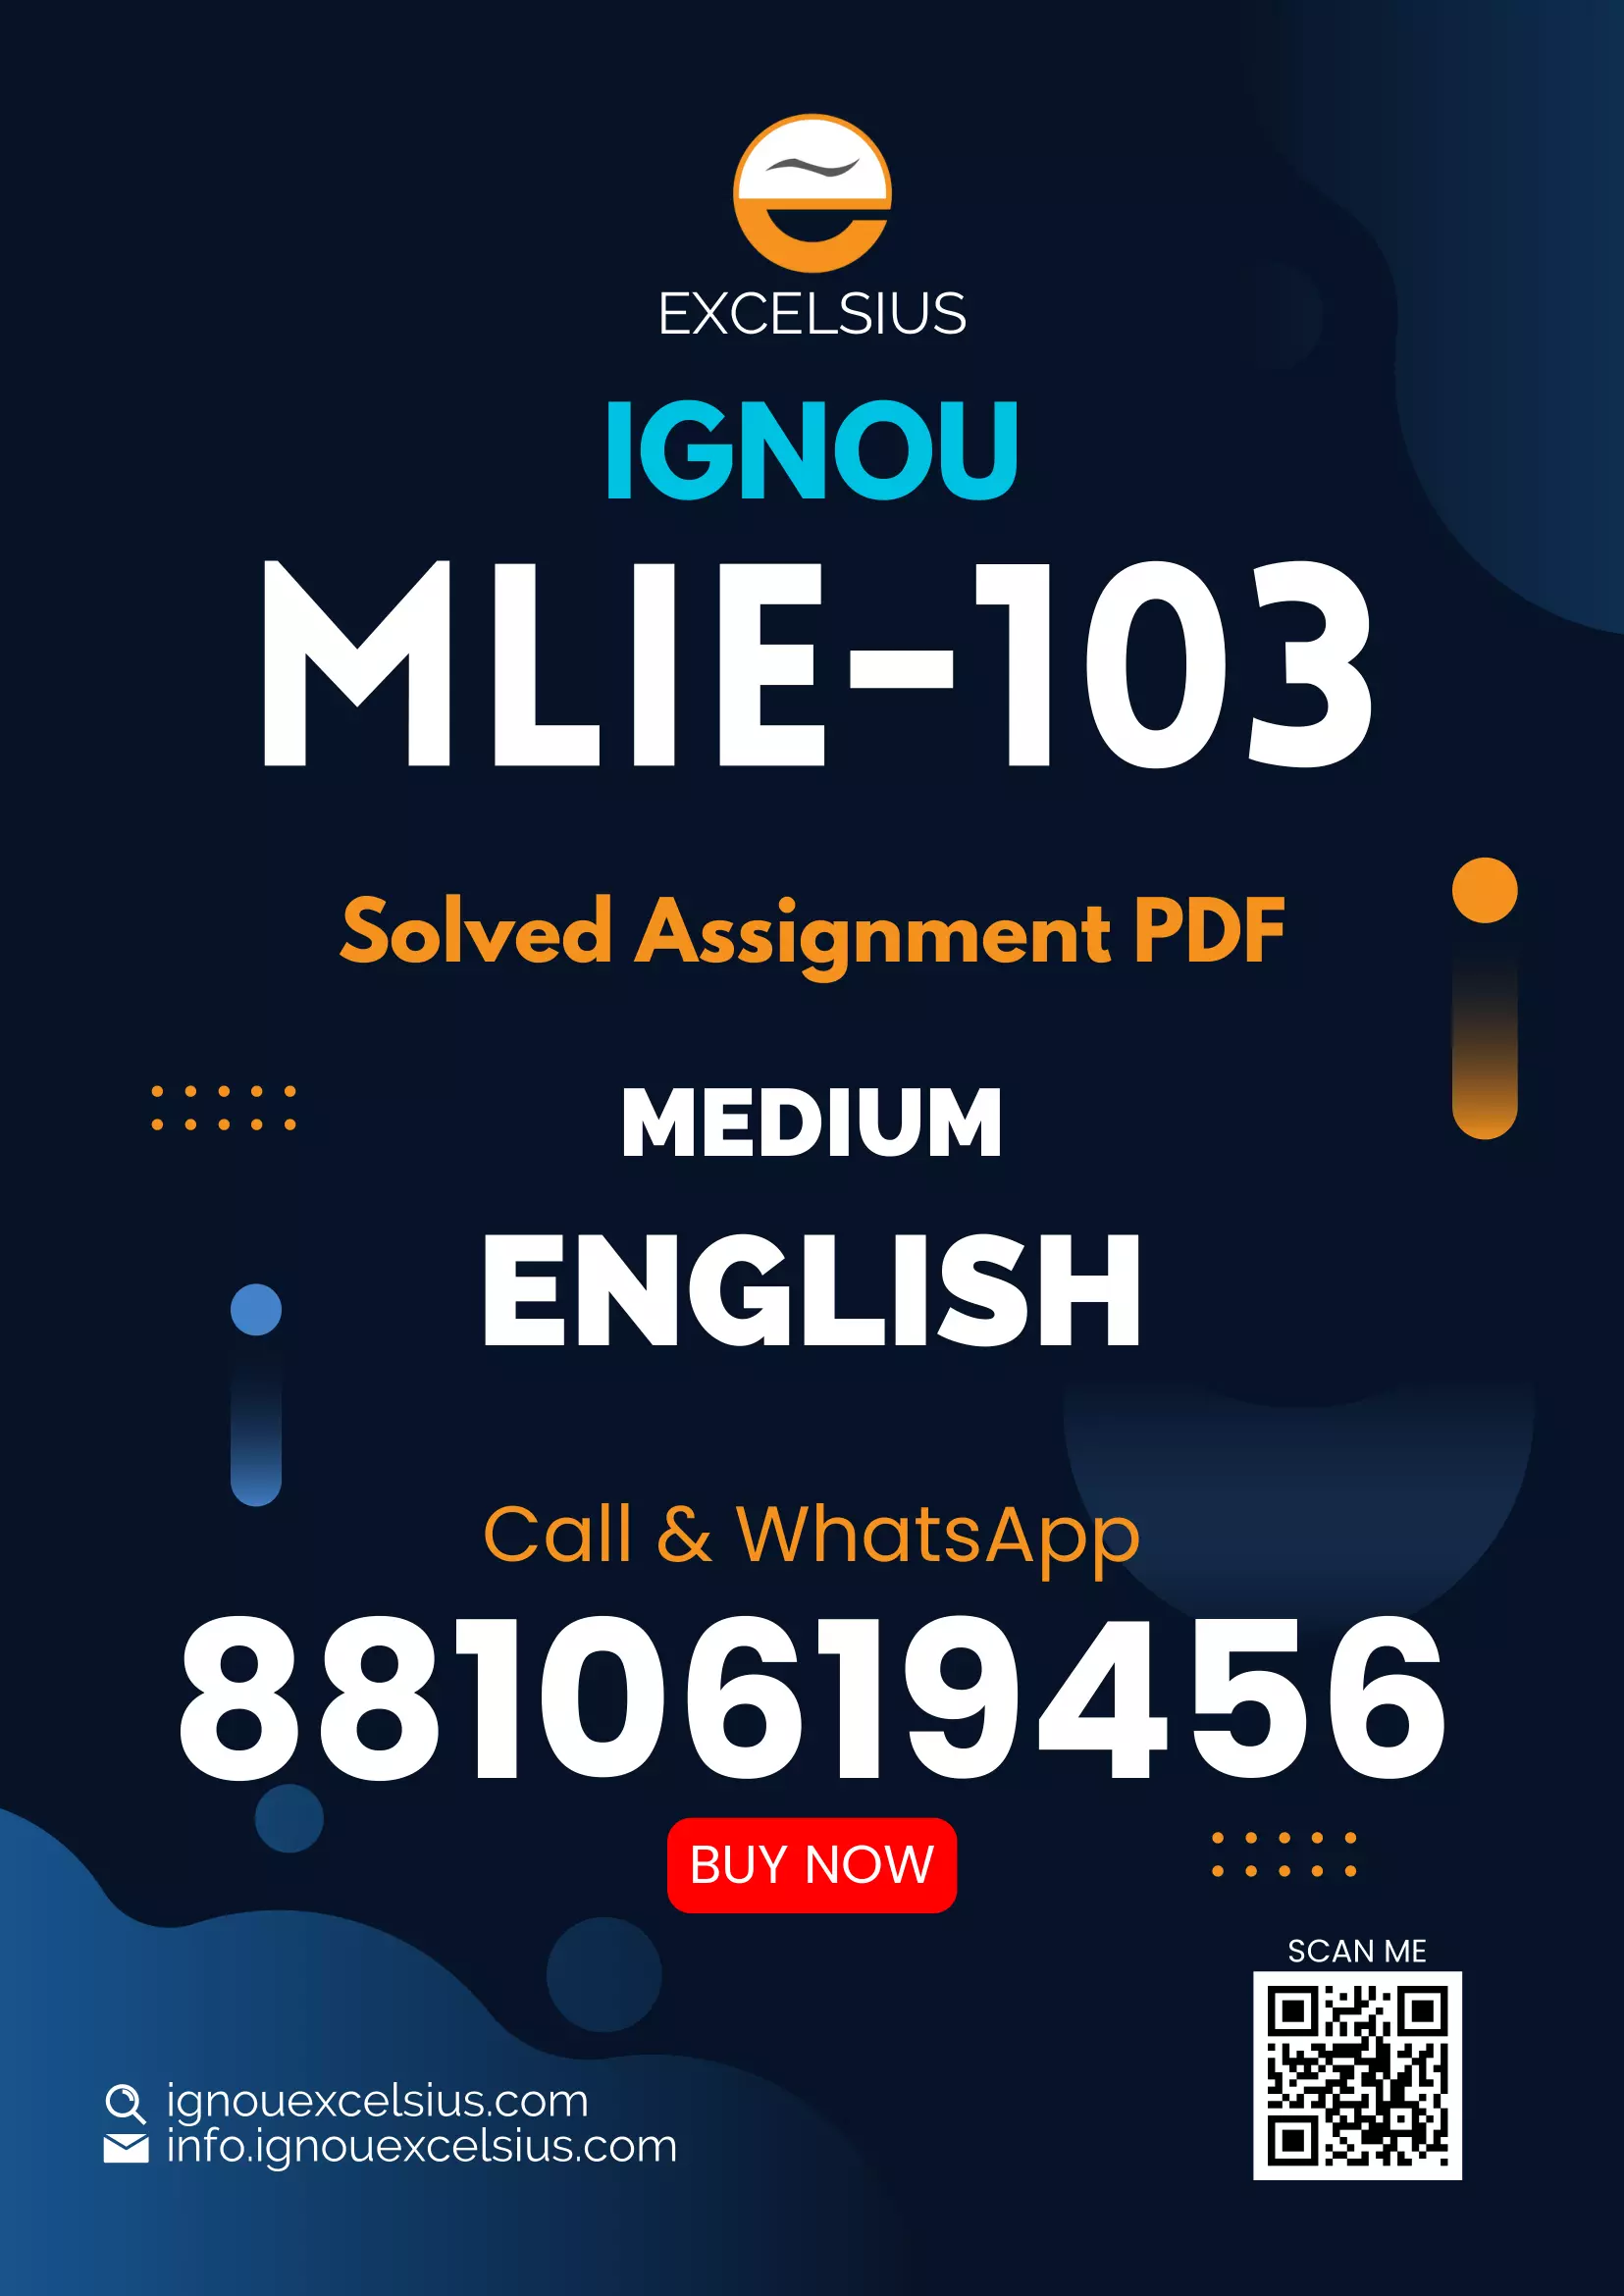 IGNOU MLIE-103 - Academic Library System, Latest Solved Assignment-July 2022 – January 2023